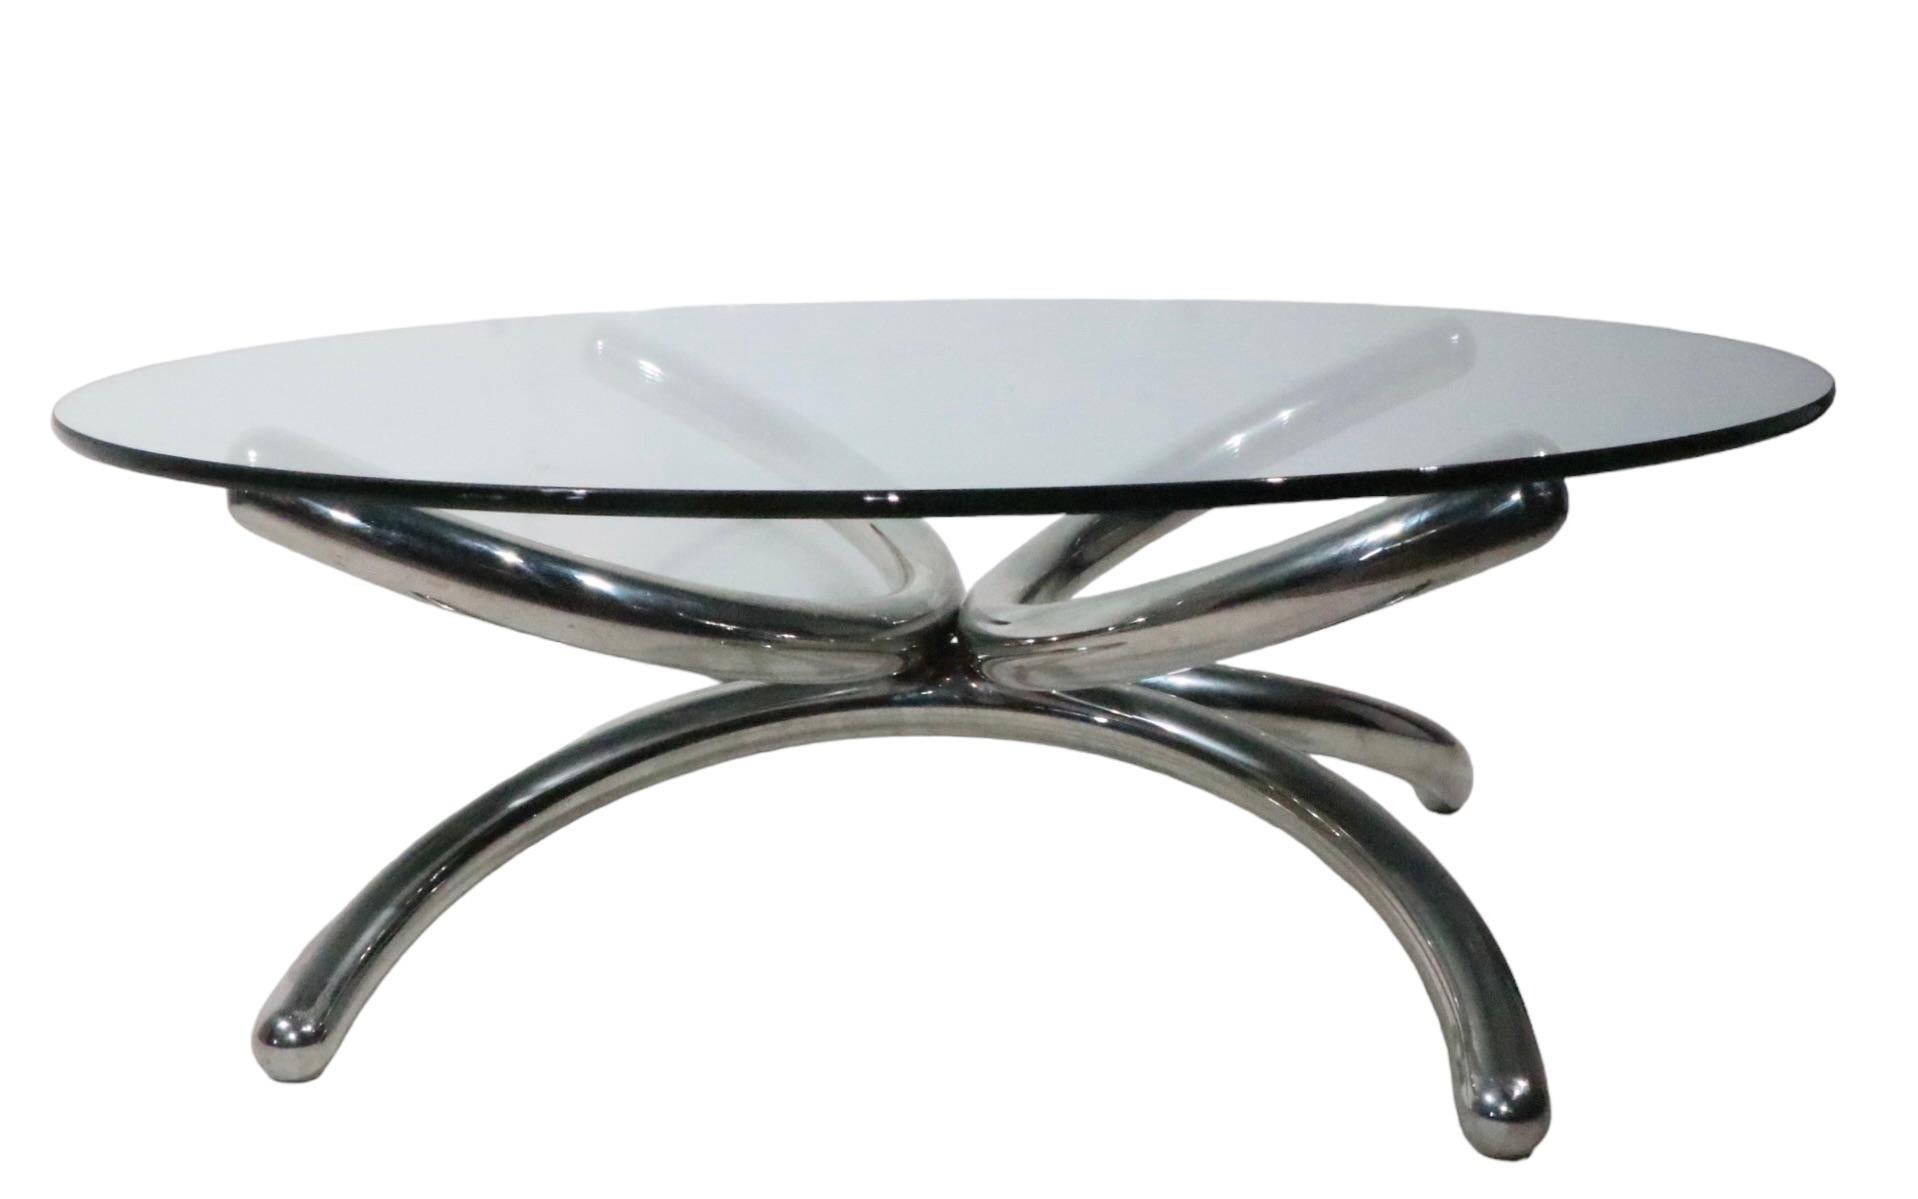  Round Chrome and Glass Coffee Cocktail Table c 1960/70s possibly Paul Tuttle  For Sale 4